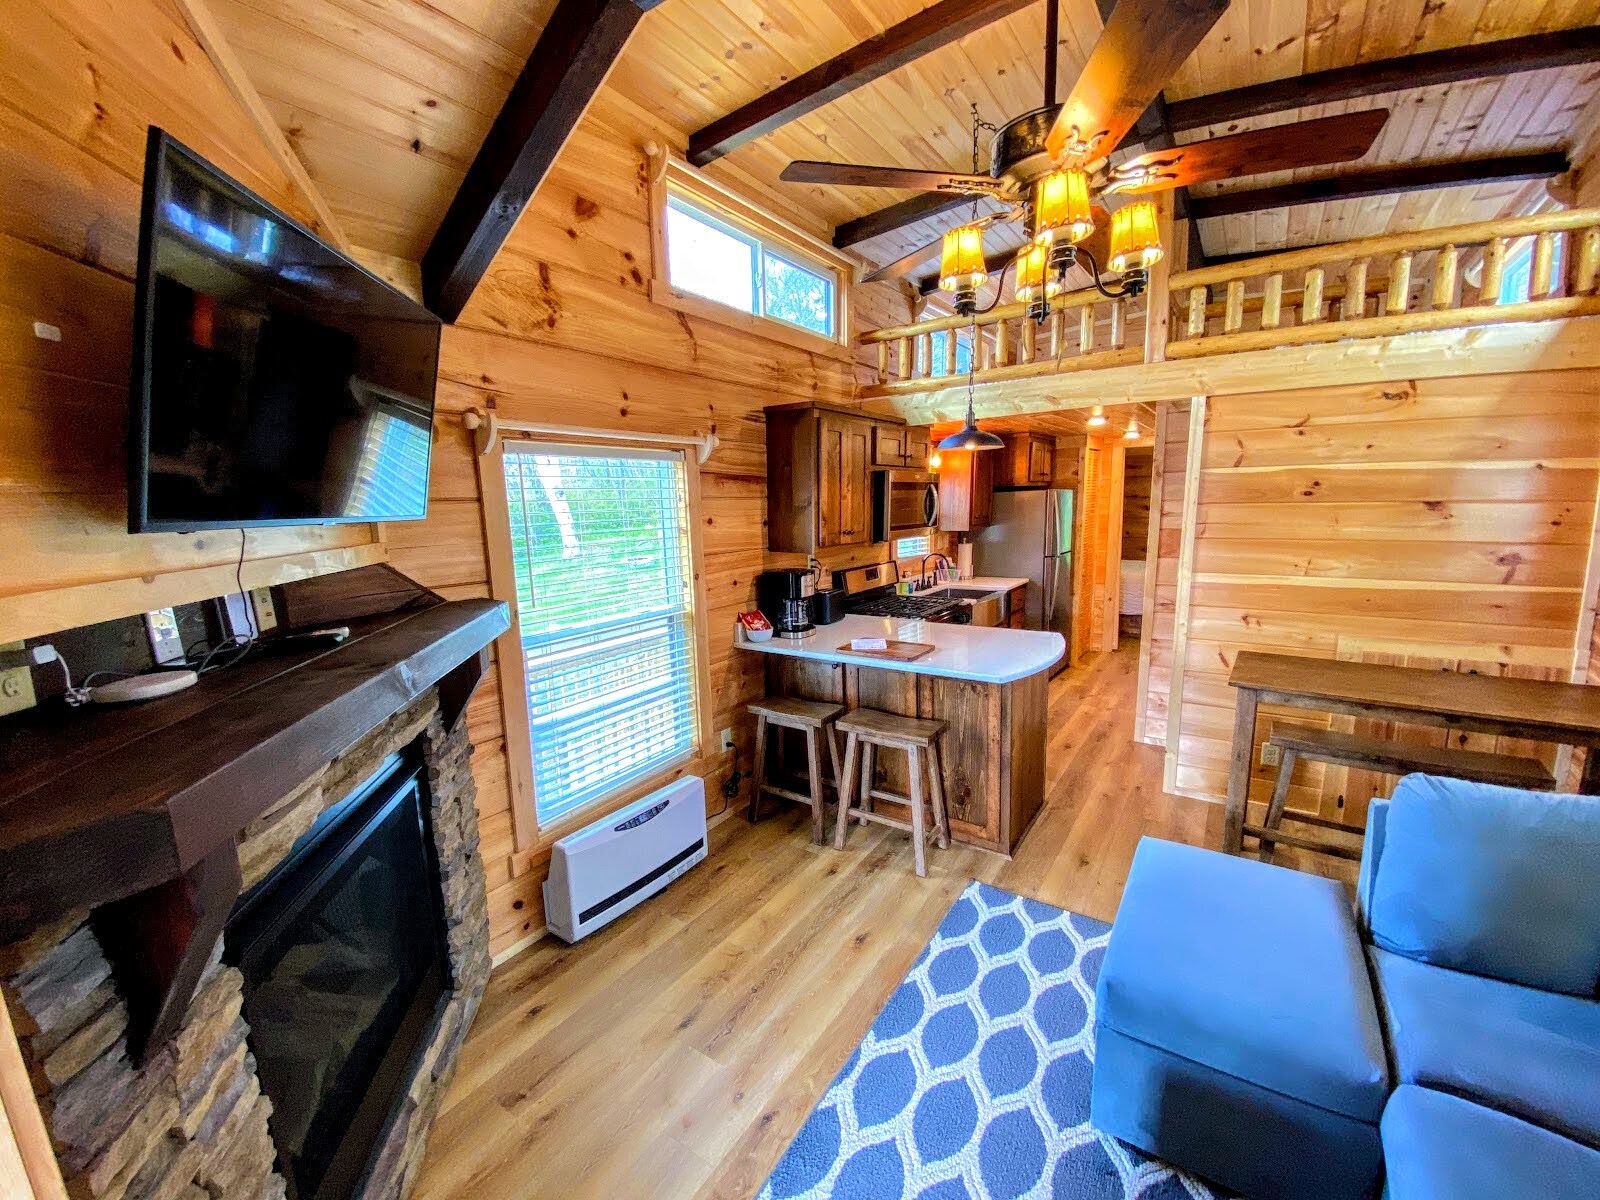 Property Image 2 - Awesome "Tiny Home" with A/C, Mountain Views, Minutes to Skiing, Hiking, Attractions